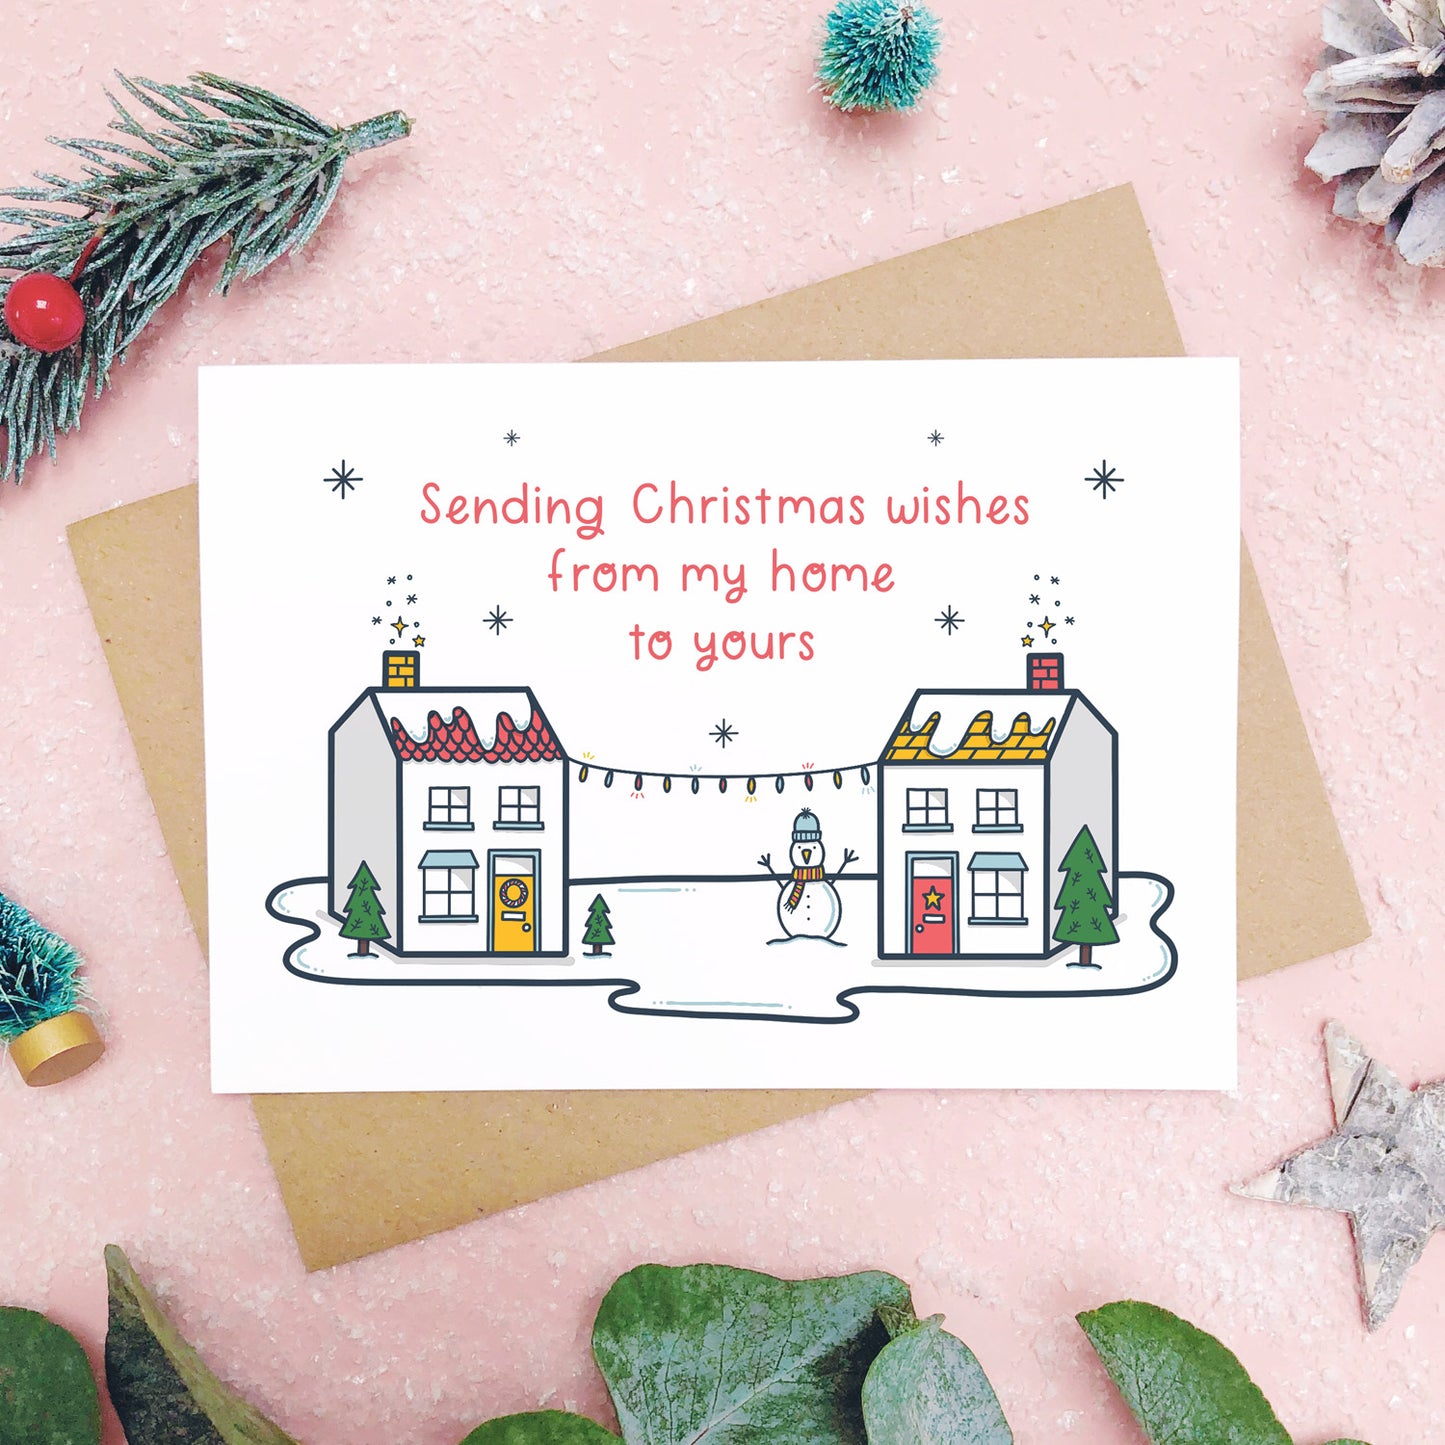  A sending wishes from my home to yours card photographed on a pink background with grey and green foliage. The card features two little houses connected by fairy lights.